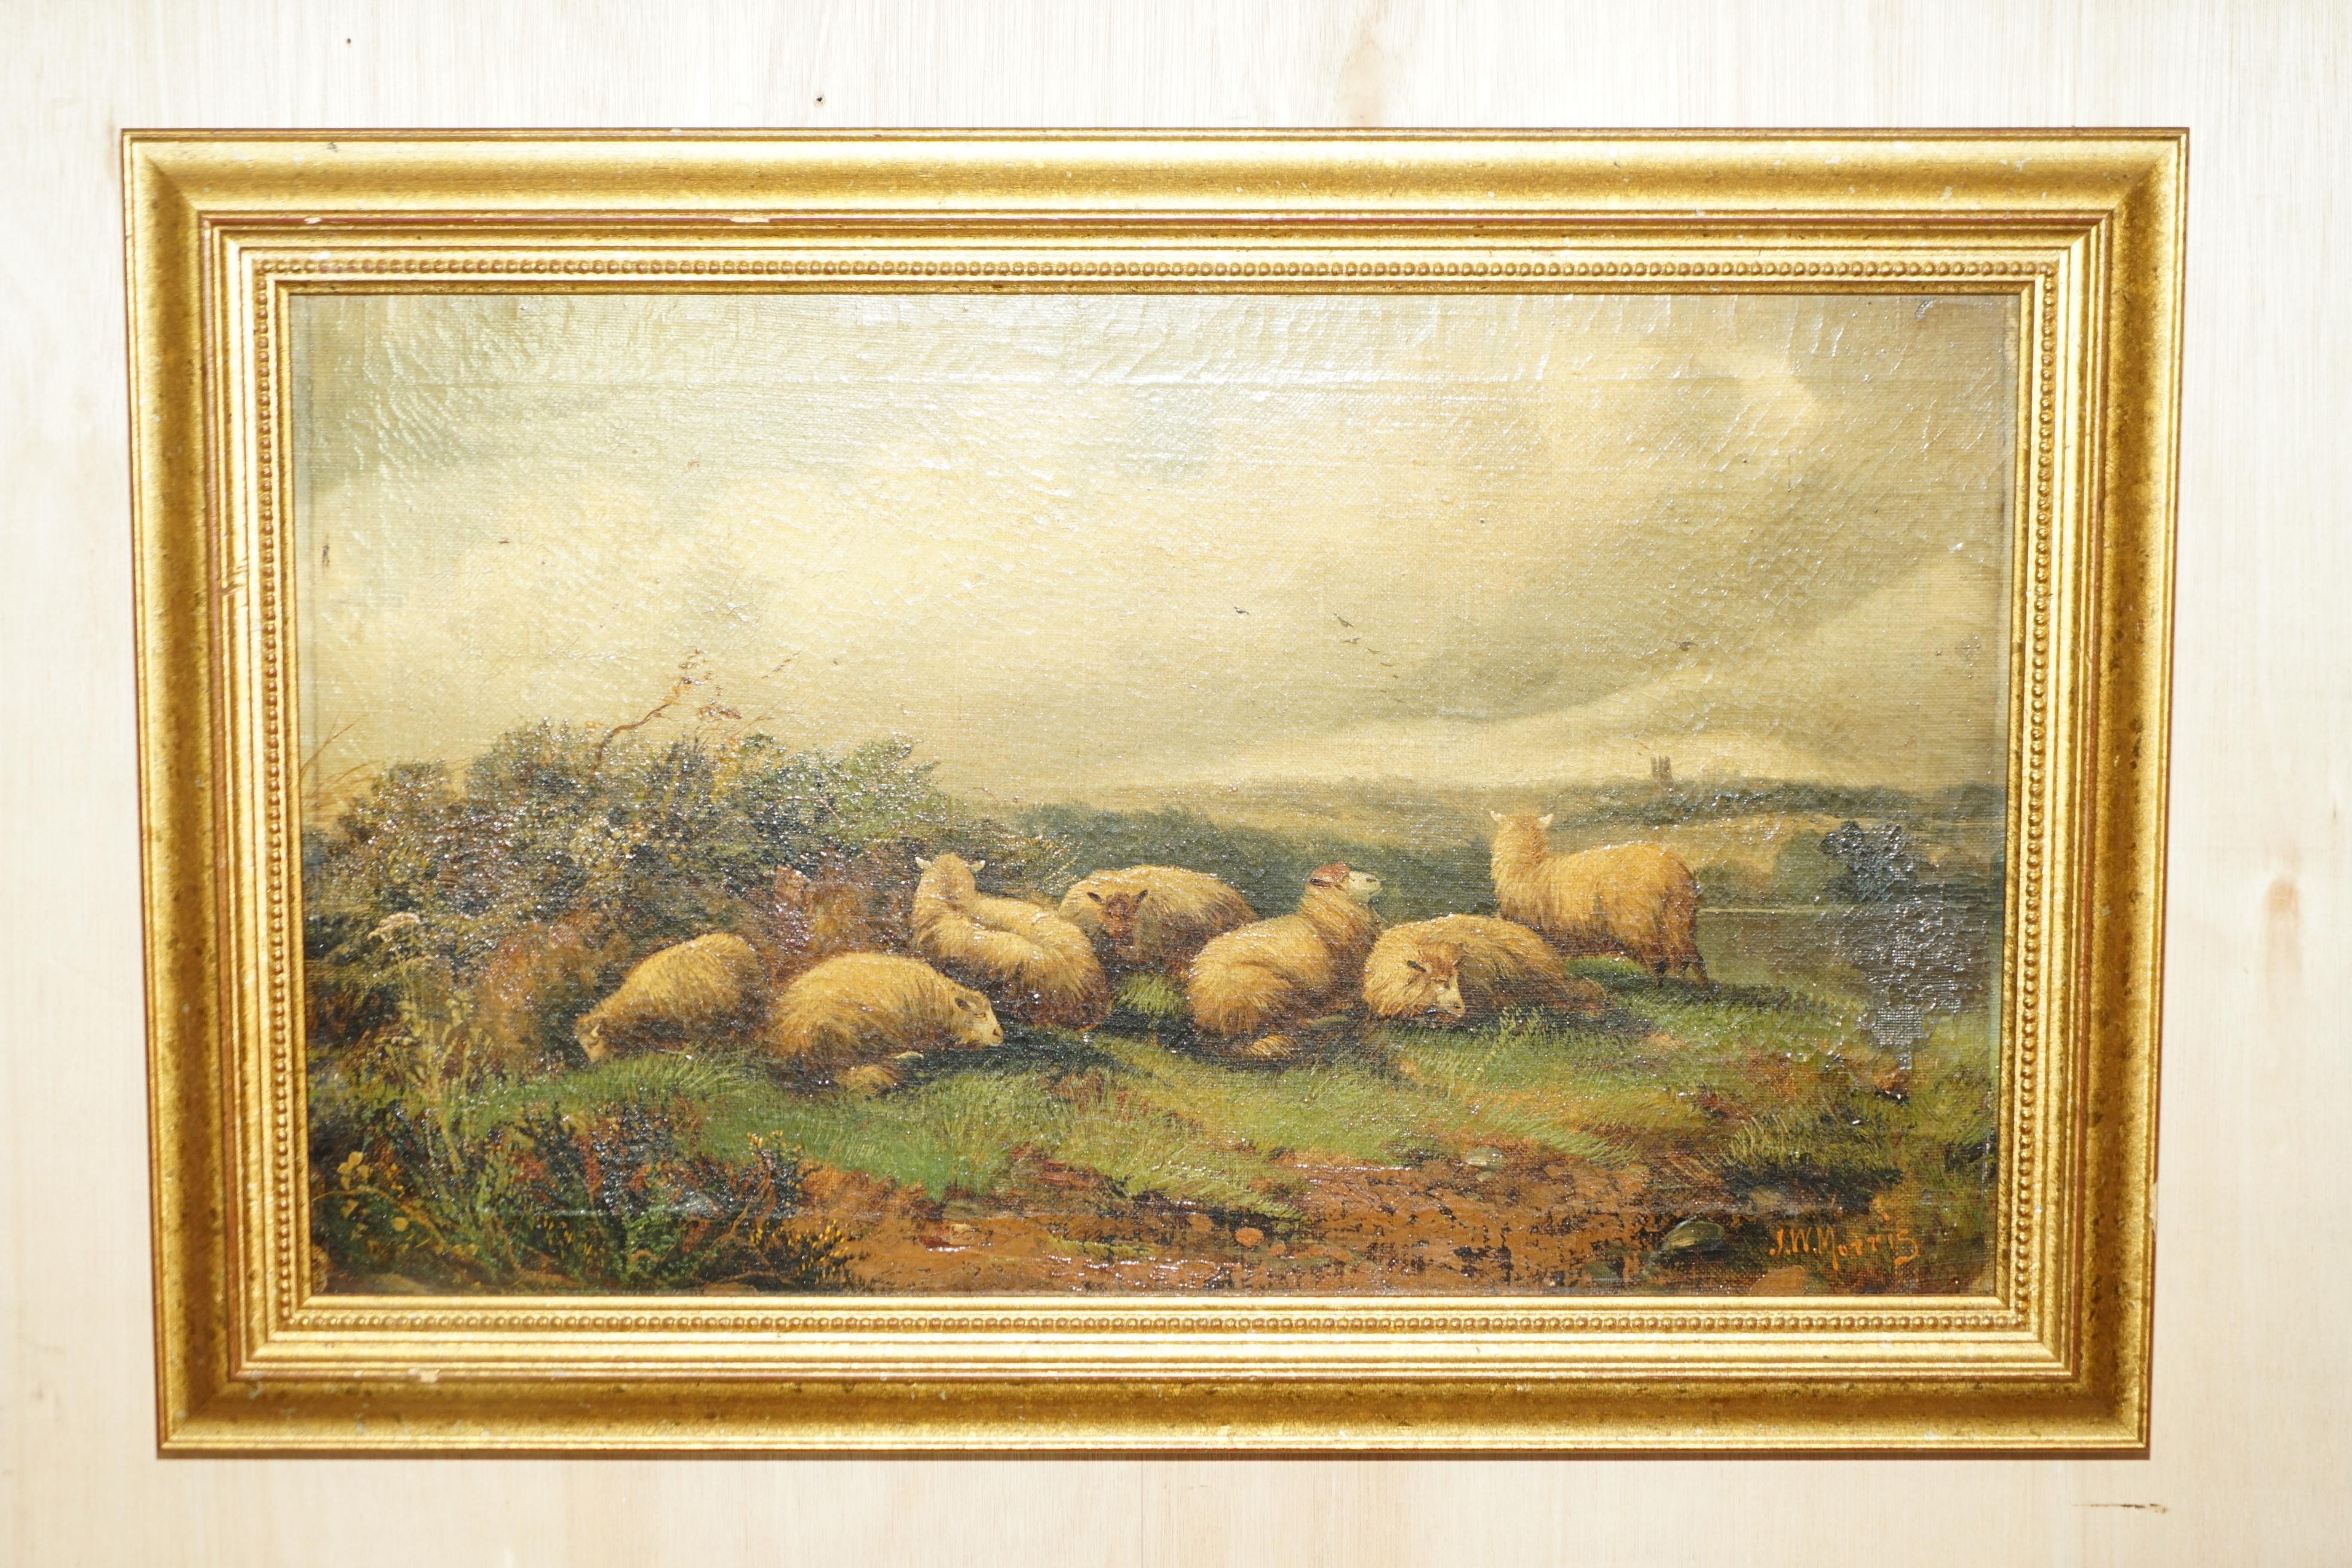 Royal House Antiques

Royal House Antiques is delighted to offer for sale this stunning original pair of John W Morris signed Victorian oil painting of Sheep in a landscape farmland setting

This pair are exceptionally well executed, the colours,